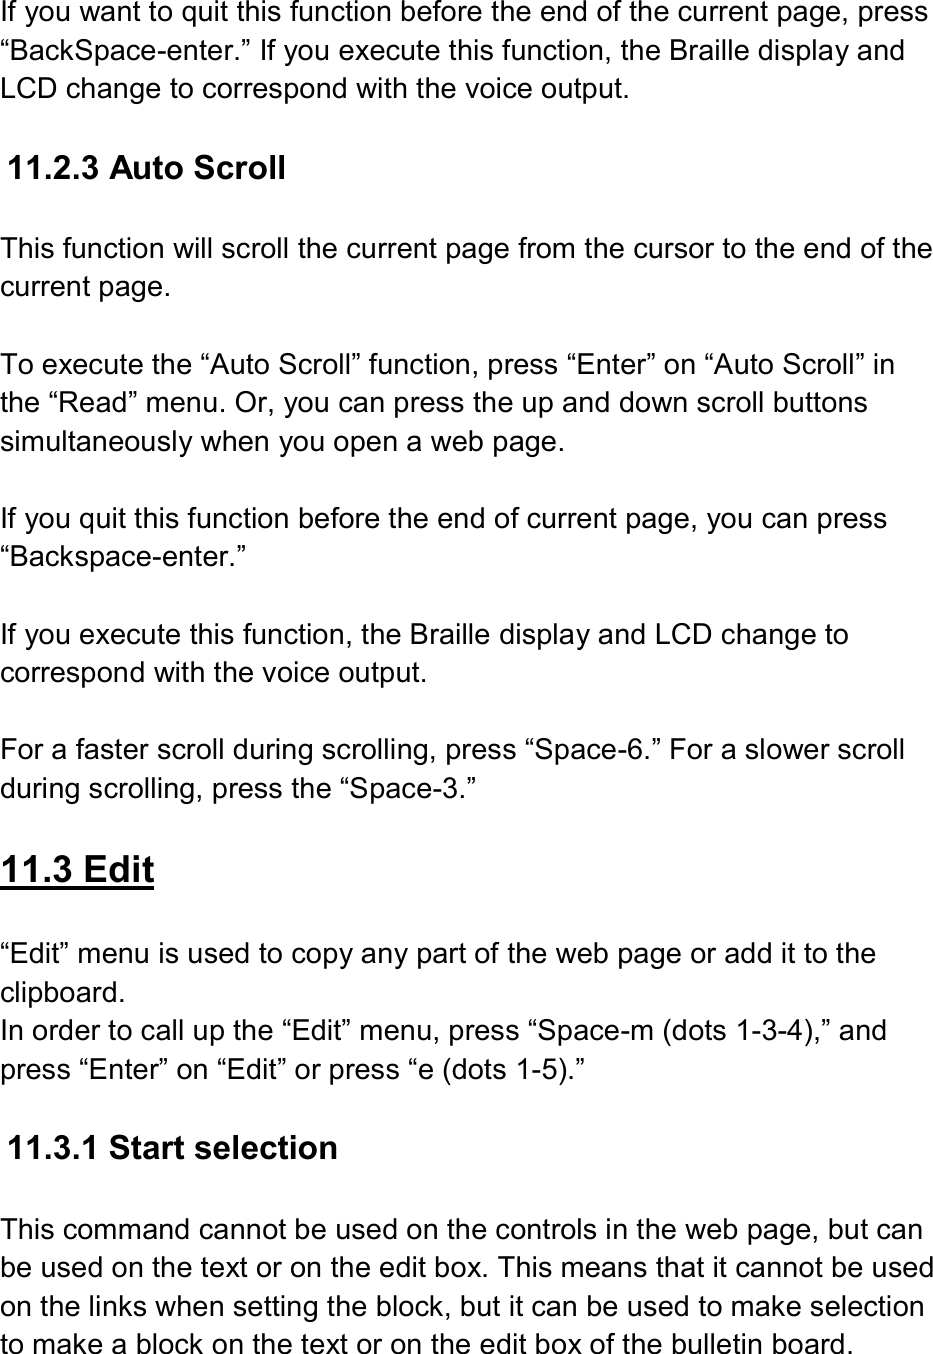  If you want to quit this function before the end of the current page, press “BackSpace-enter.” If you execute this function, the Braille display and LCD change to correspond with the voice output.  11.2.3 Auto Scroll  This function will scroll the current page from the cursor to the end of the current page.  To execute the “Auto Scroll” function, press “Enter” on “Auto Scroll” in the “Read” menu. Or, you can press the up and down scroll buttons simultaneously when you open a web page.  If you quit this function before the end of current page, you can press “Backspace-enter.”    If you execute this function, the Braille display and LCD change to correspond with the voice output.  For a faster scroll during scrolling, press “Space-6.” For a slower scroll during scrolling, press the “Space-3.”  11.3 Edit  “Edit” menu is used to copy any part of the web page or add it to the clipboard. In order to call up the “Edit” menu, press “Space-m (dots 1-3-4),” and press “Enter” on “Edit” or press “e (dots 1-5).”  11.3.1 Start selection  This command cannot be used on the controls in the web page, but can be used on the text or on the edit box. This means that it cannot be used on the links when setting the block, but it can be used to make selection to make a block on the text or on the edit box of the bulletin board. 